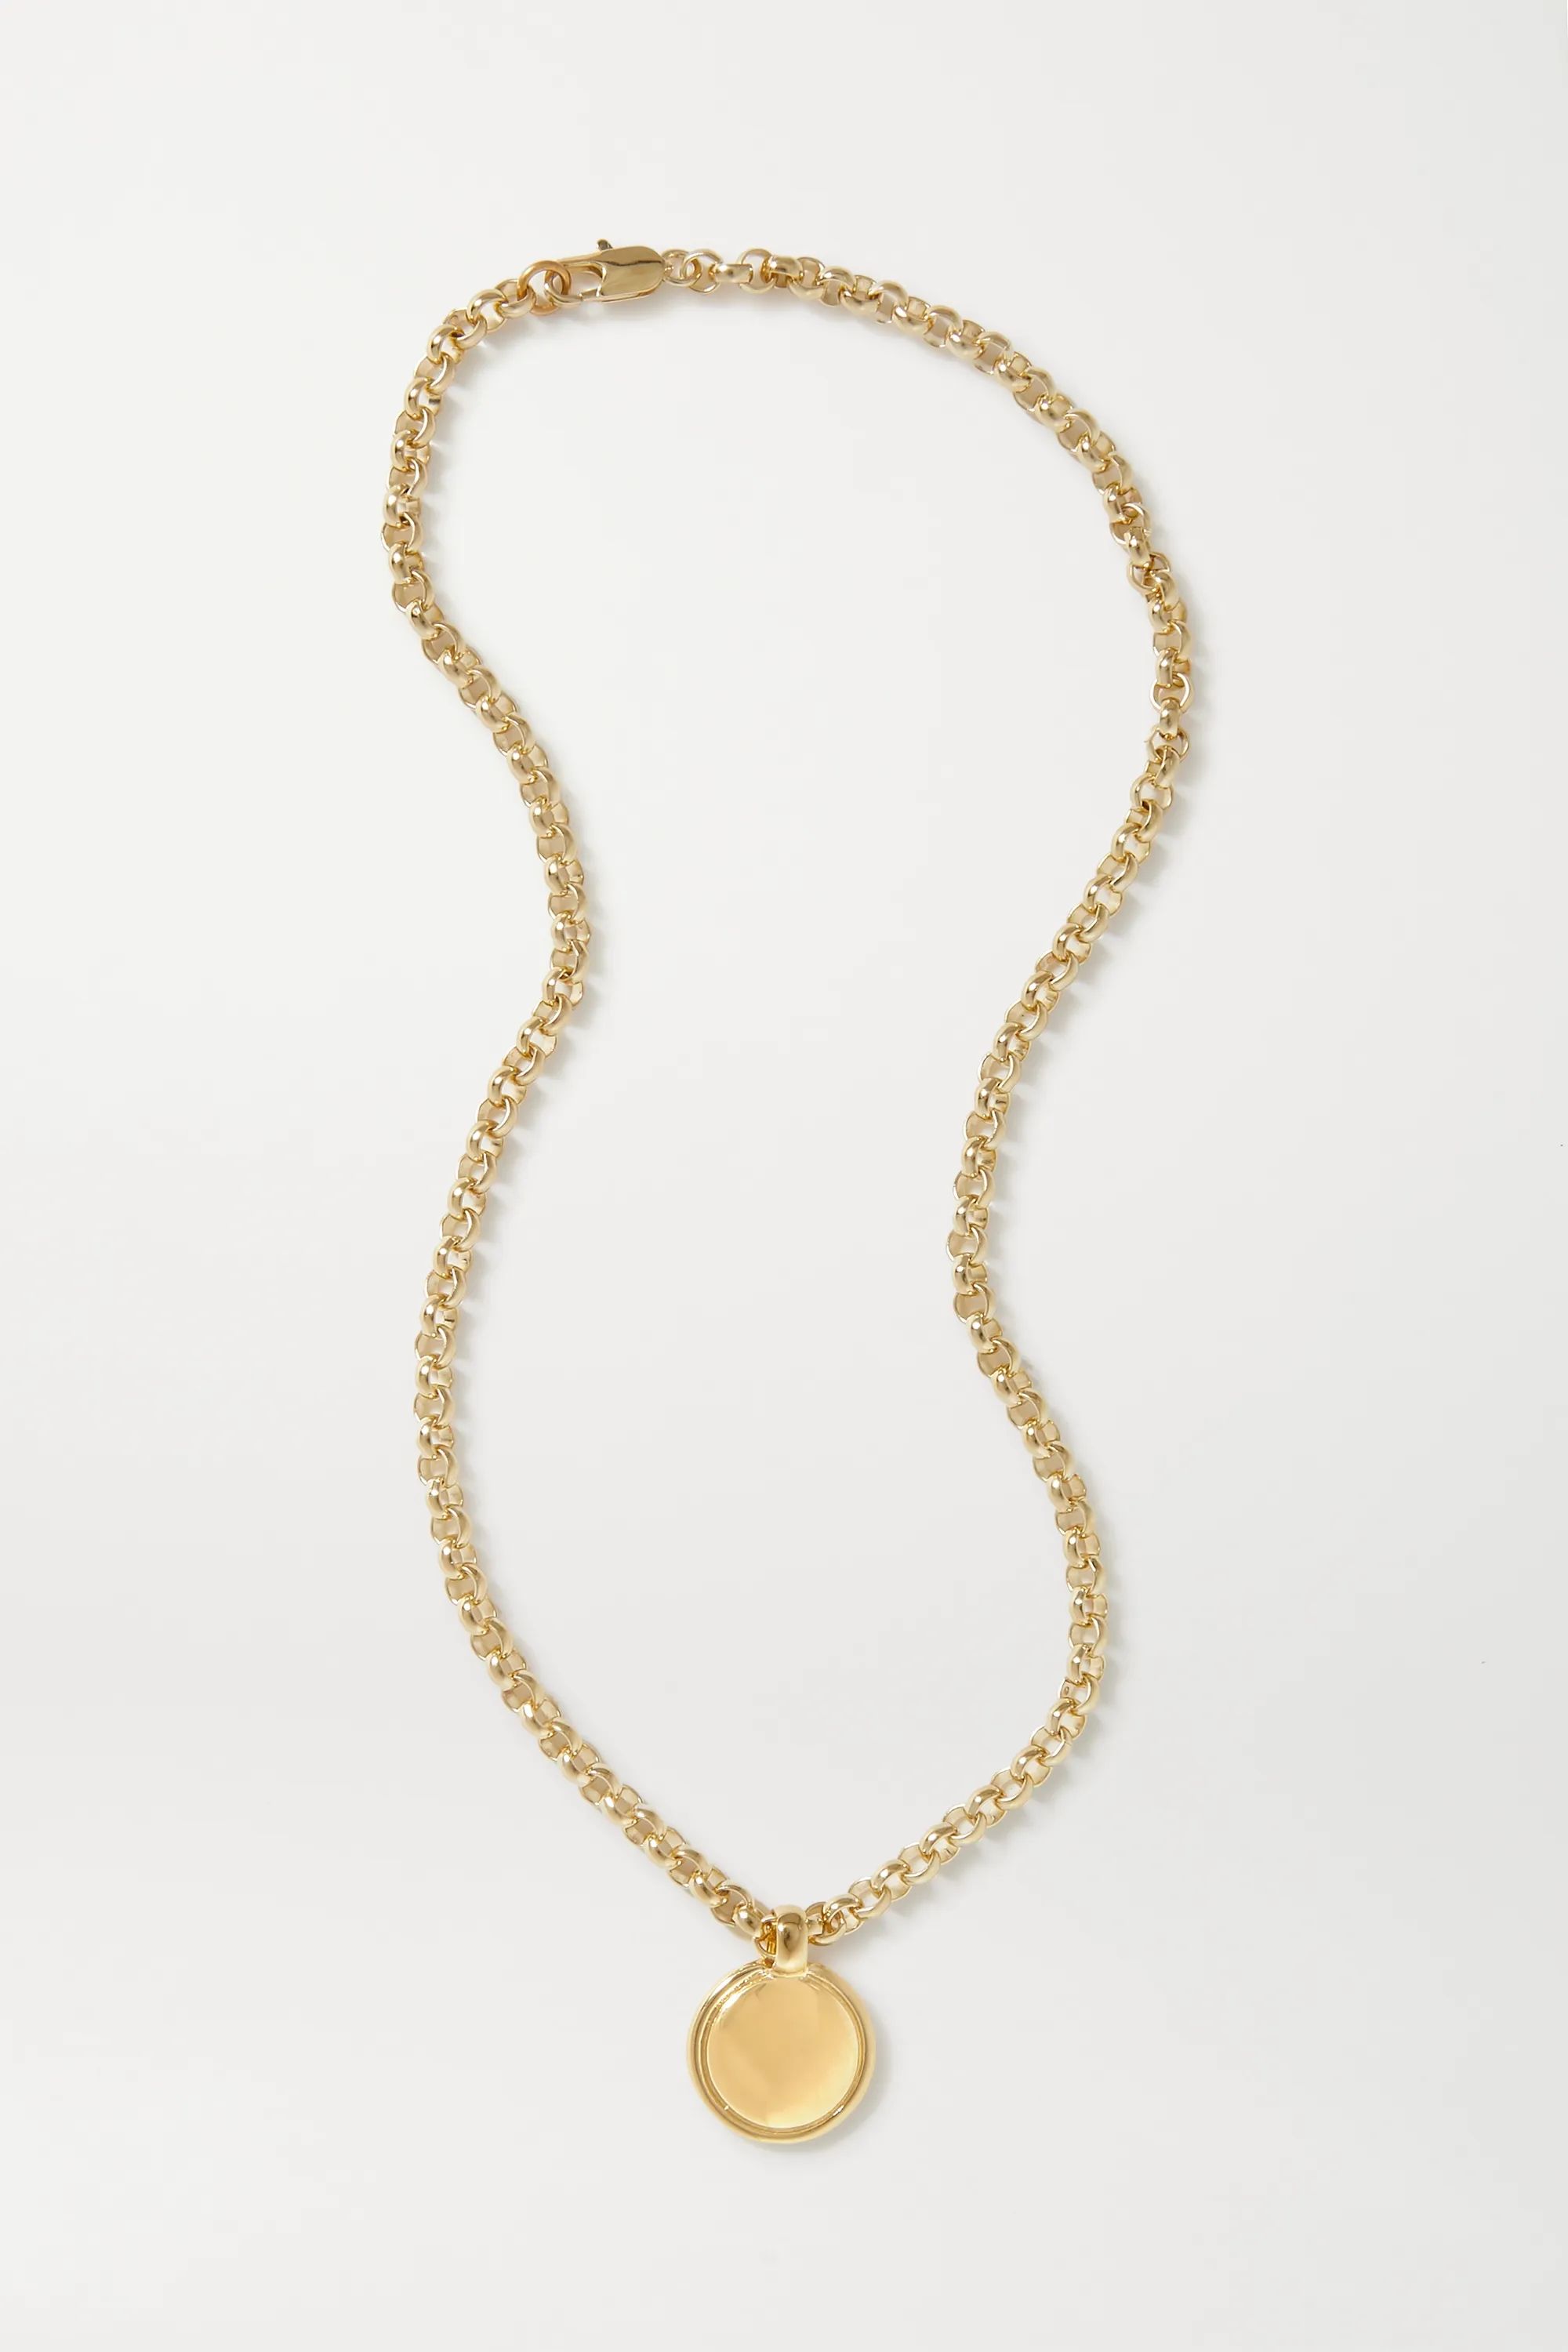 + NET SUSTAIN Rosa gold-plated necklace | NET-A-PORTER (US)